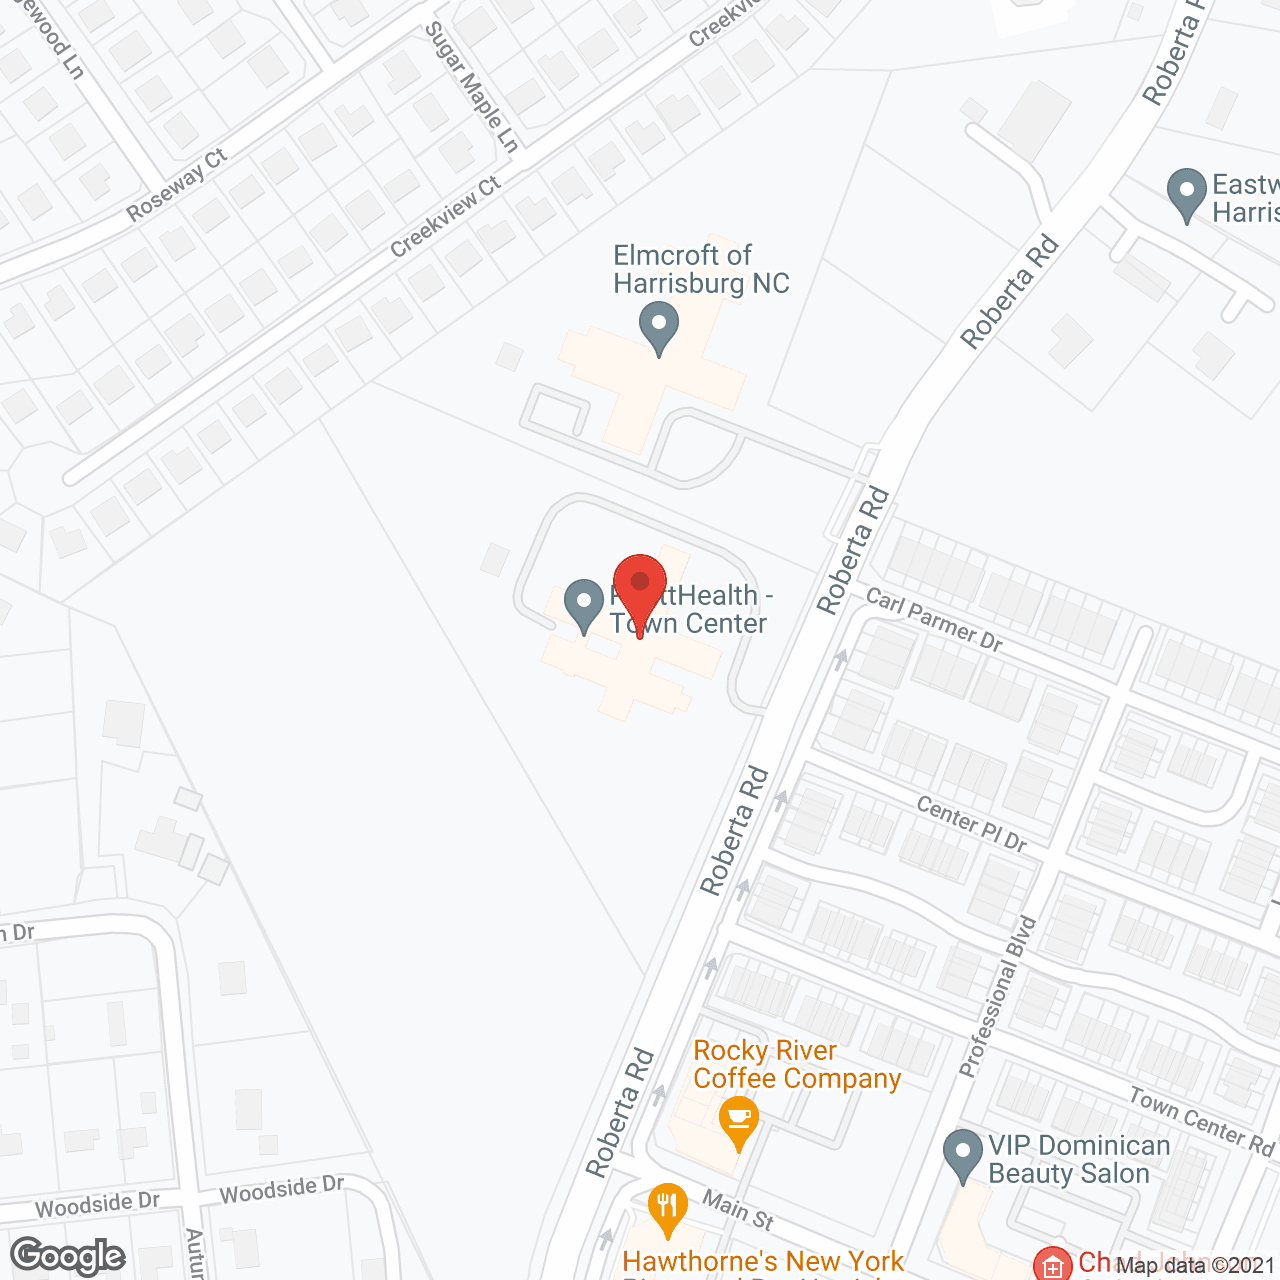 Pruitt Health at Town Center in google map